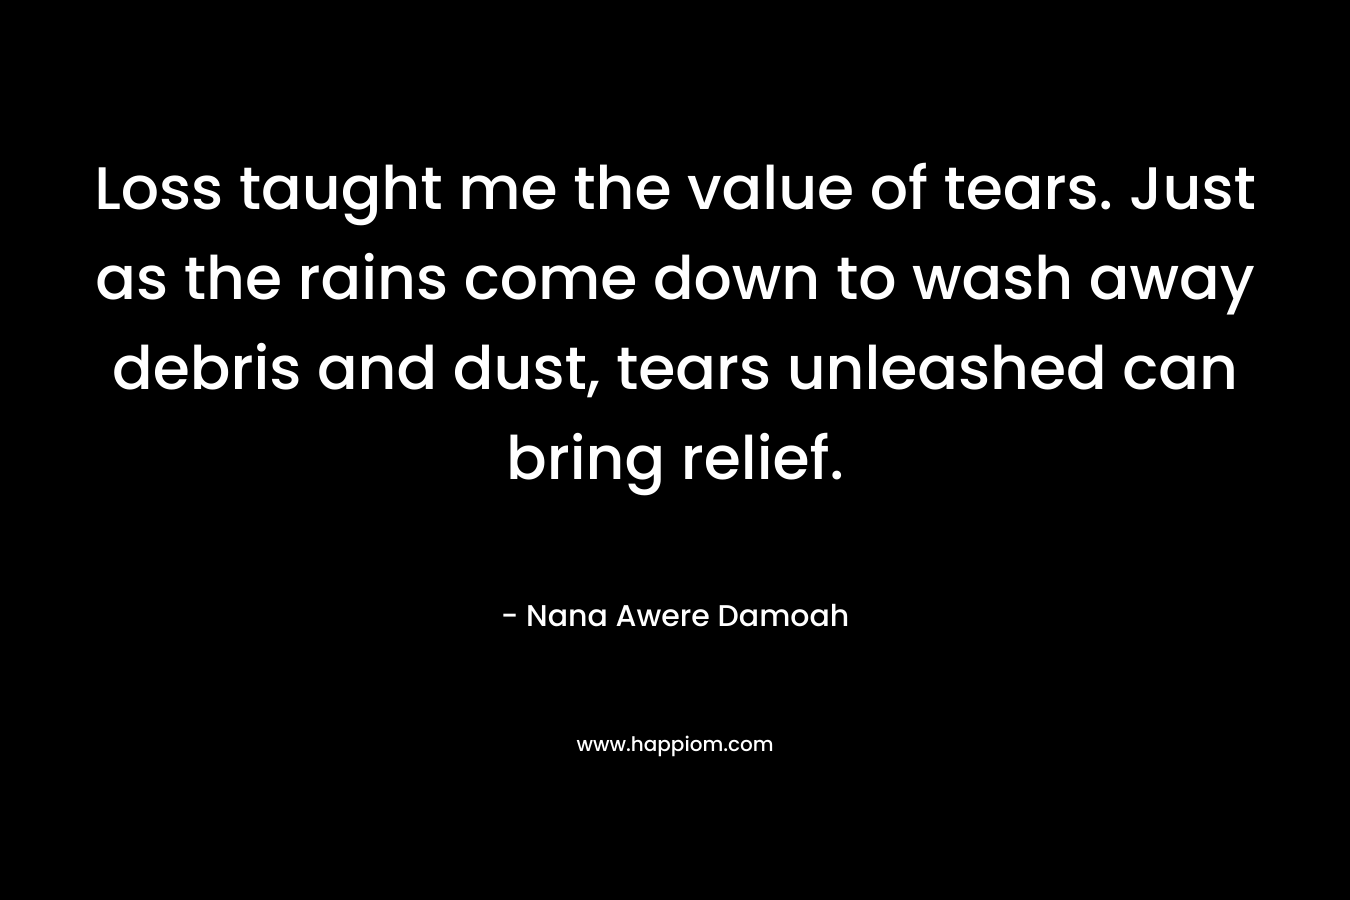 Loss taught me the value of tears. Just as the rains come down to wash away debris and dust, tears unleashed can bring relief.